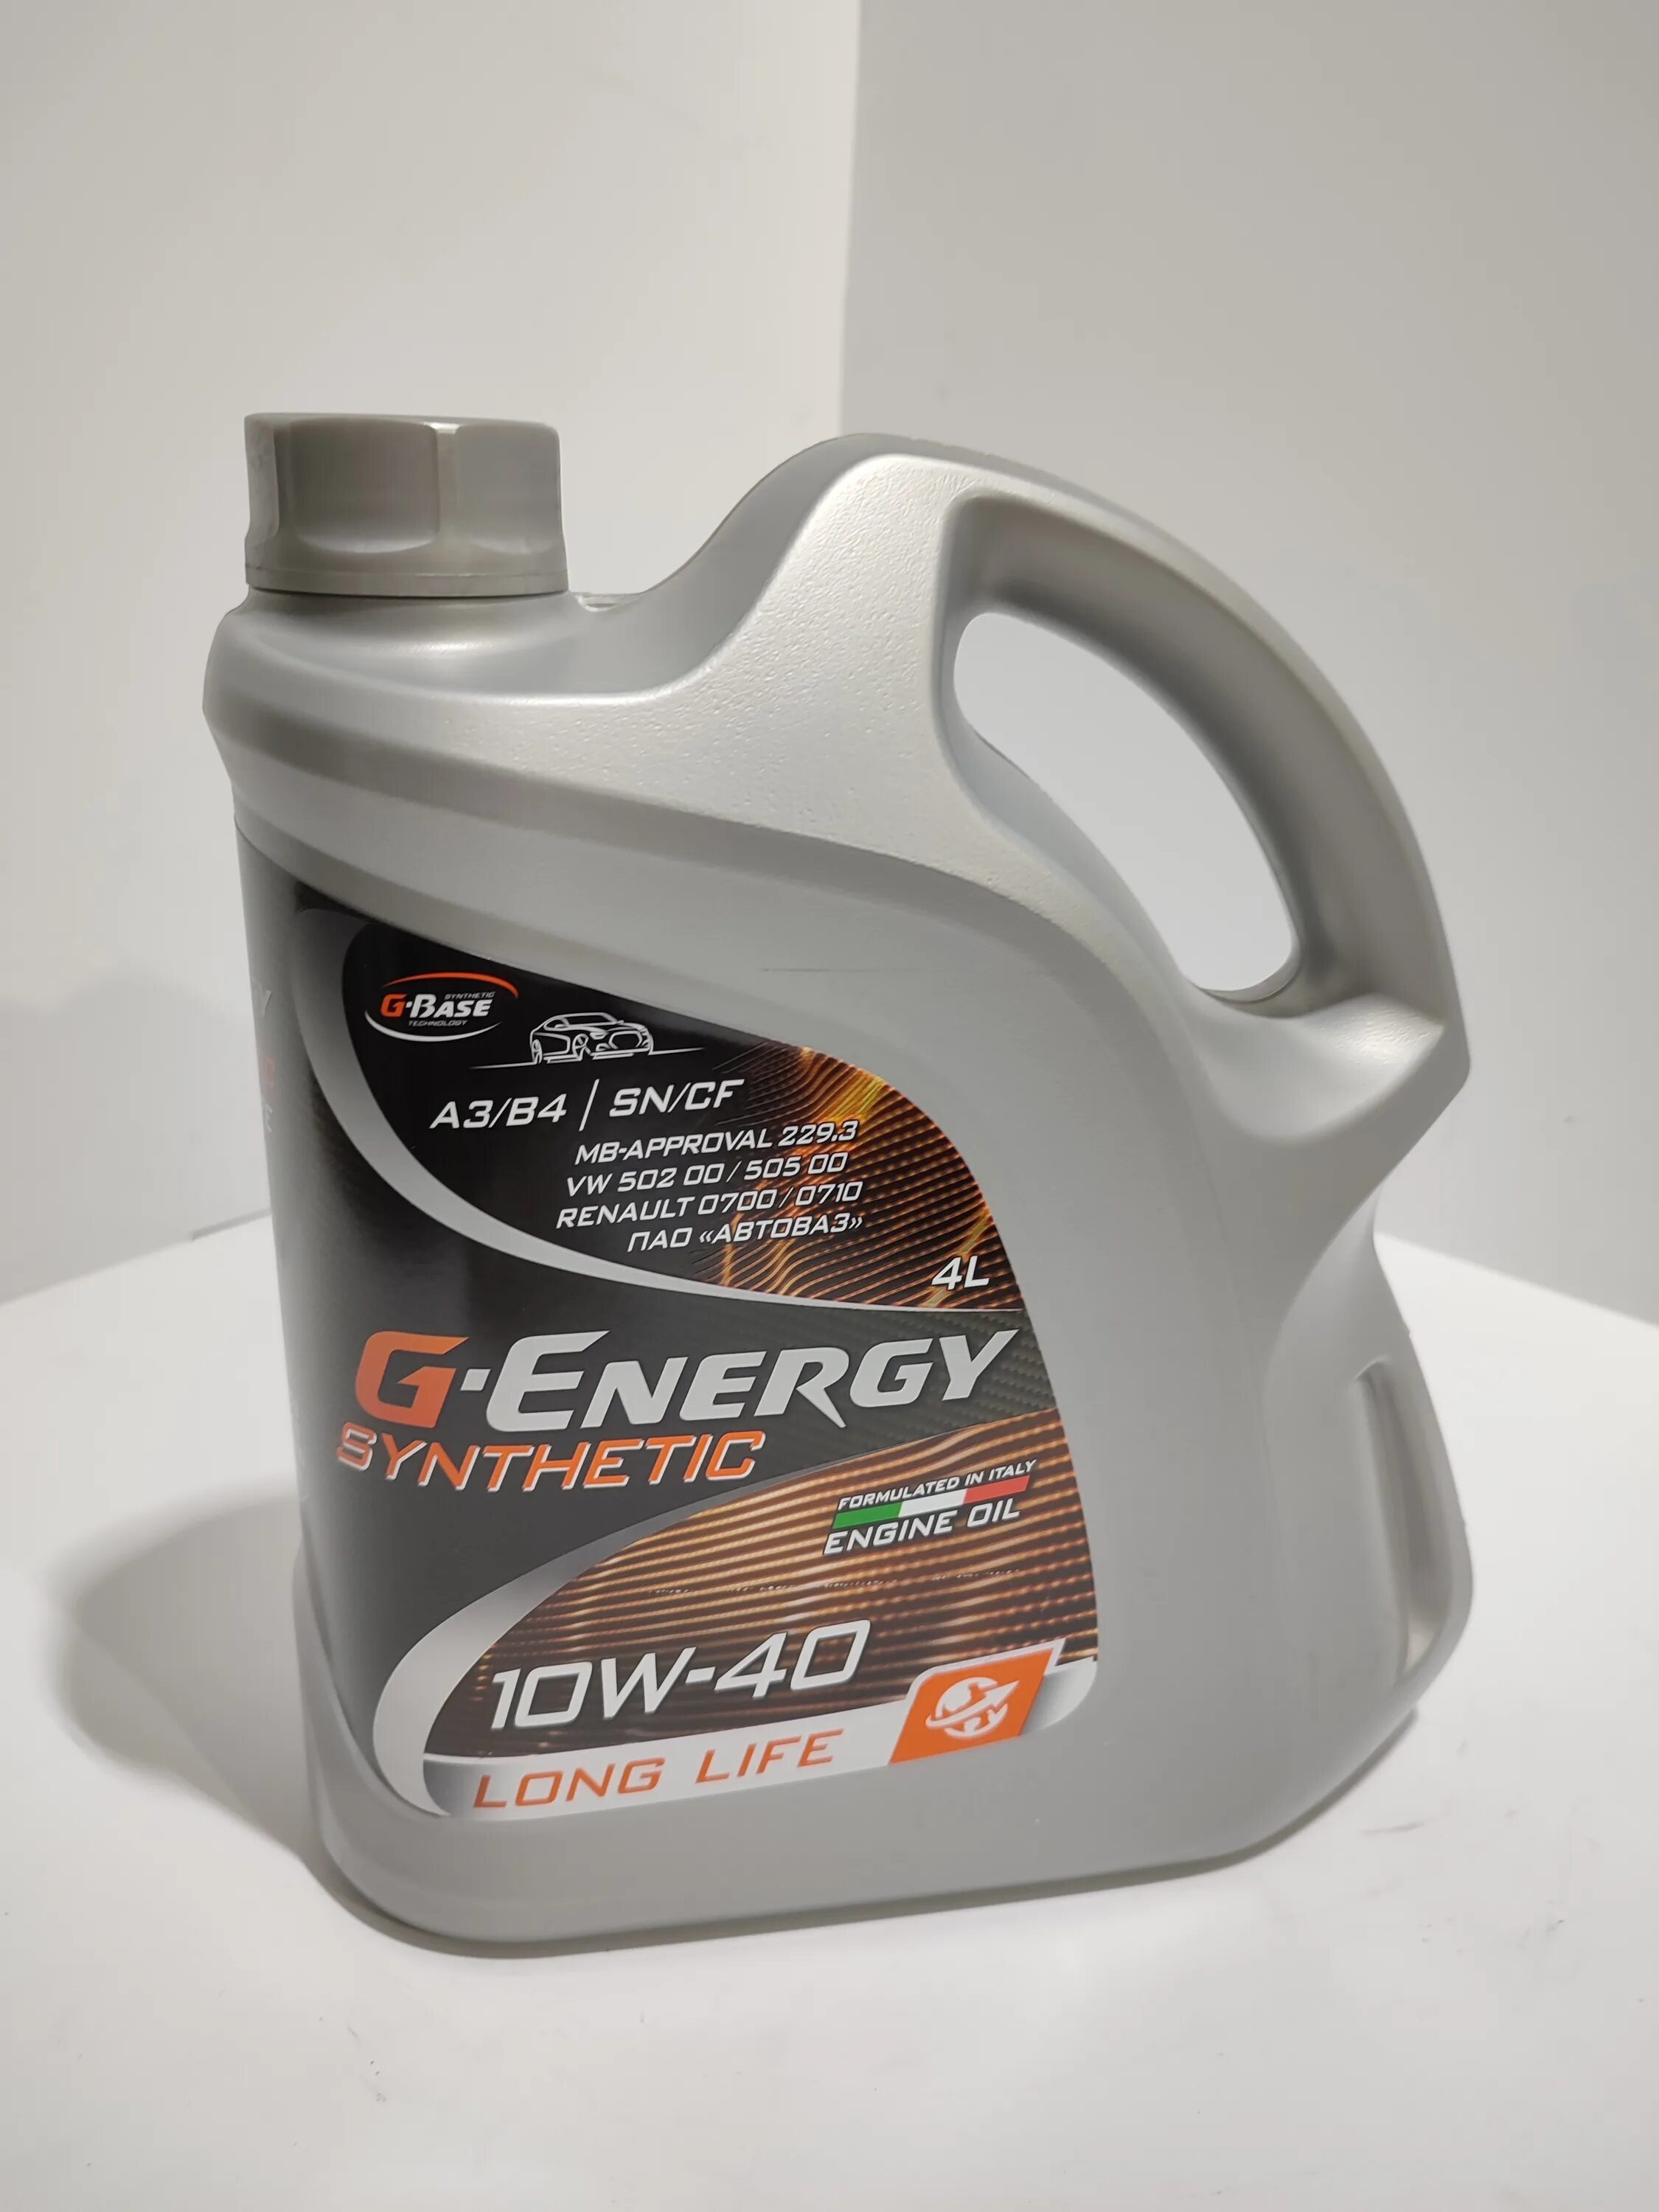 Energy synthetic long life 10w 40. G Energy 10w 40 long Life. Масло g Energy 10w 40. G Energy 5w30 8034108190099. Машинное масло g-Energy Active 5w30.